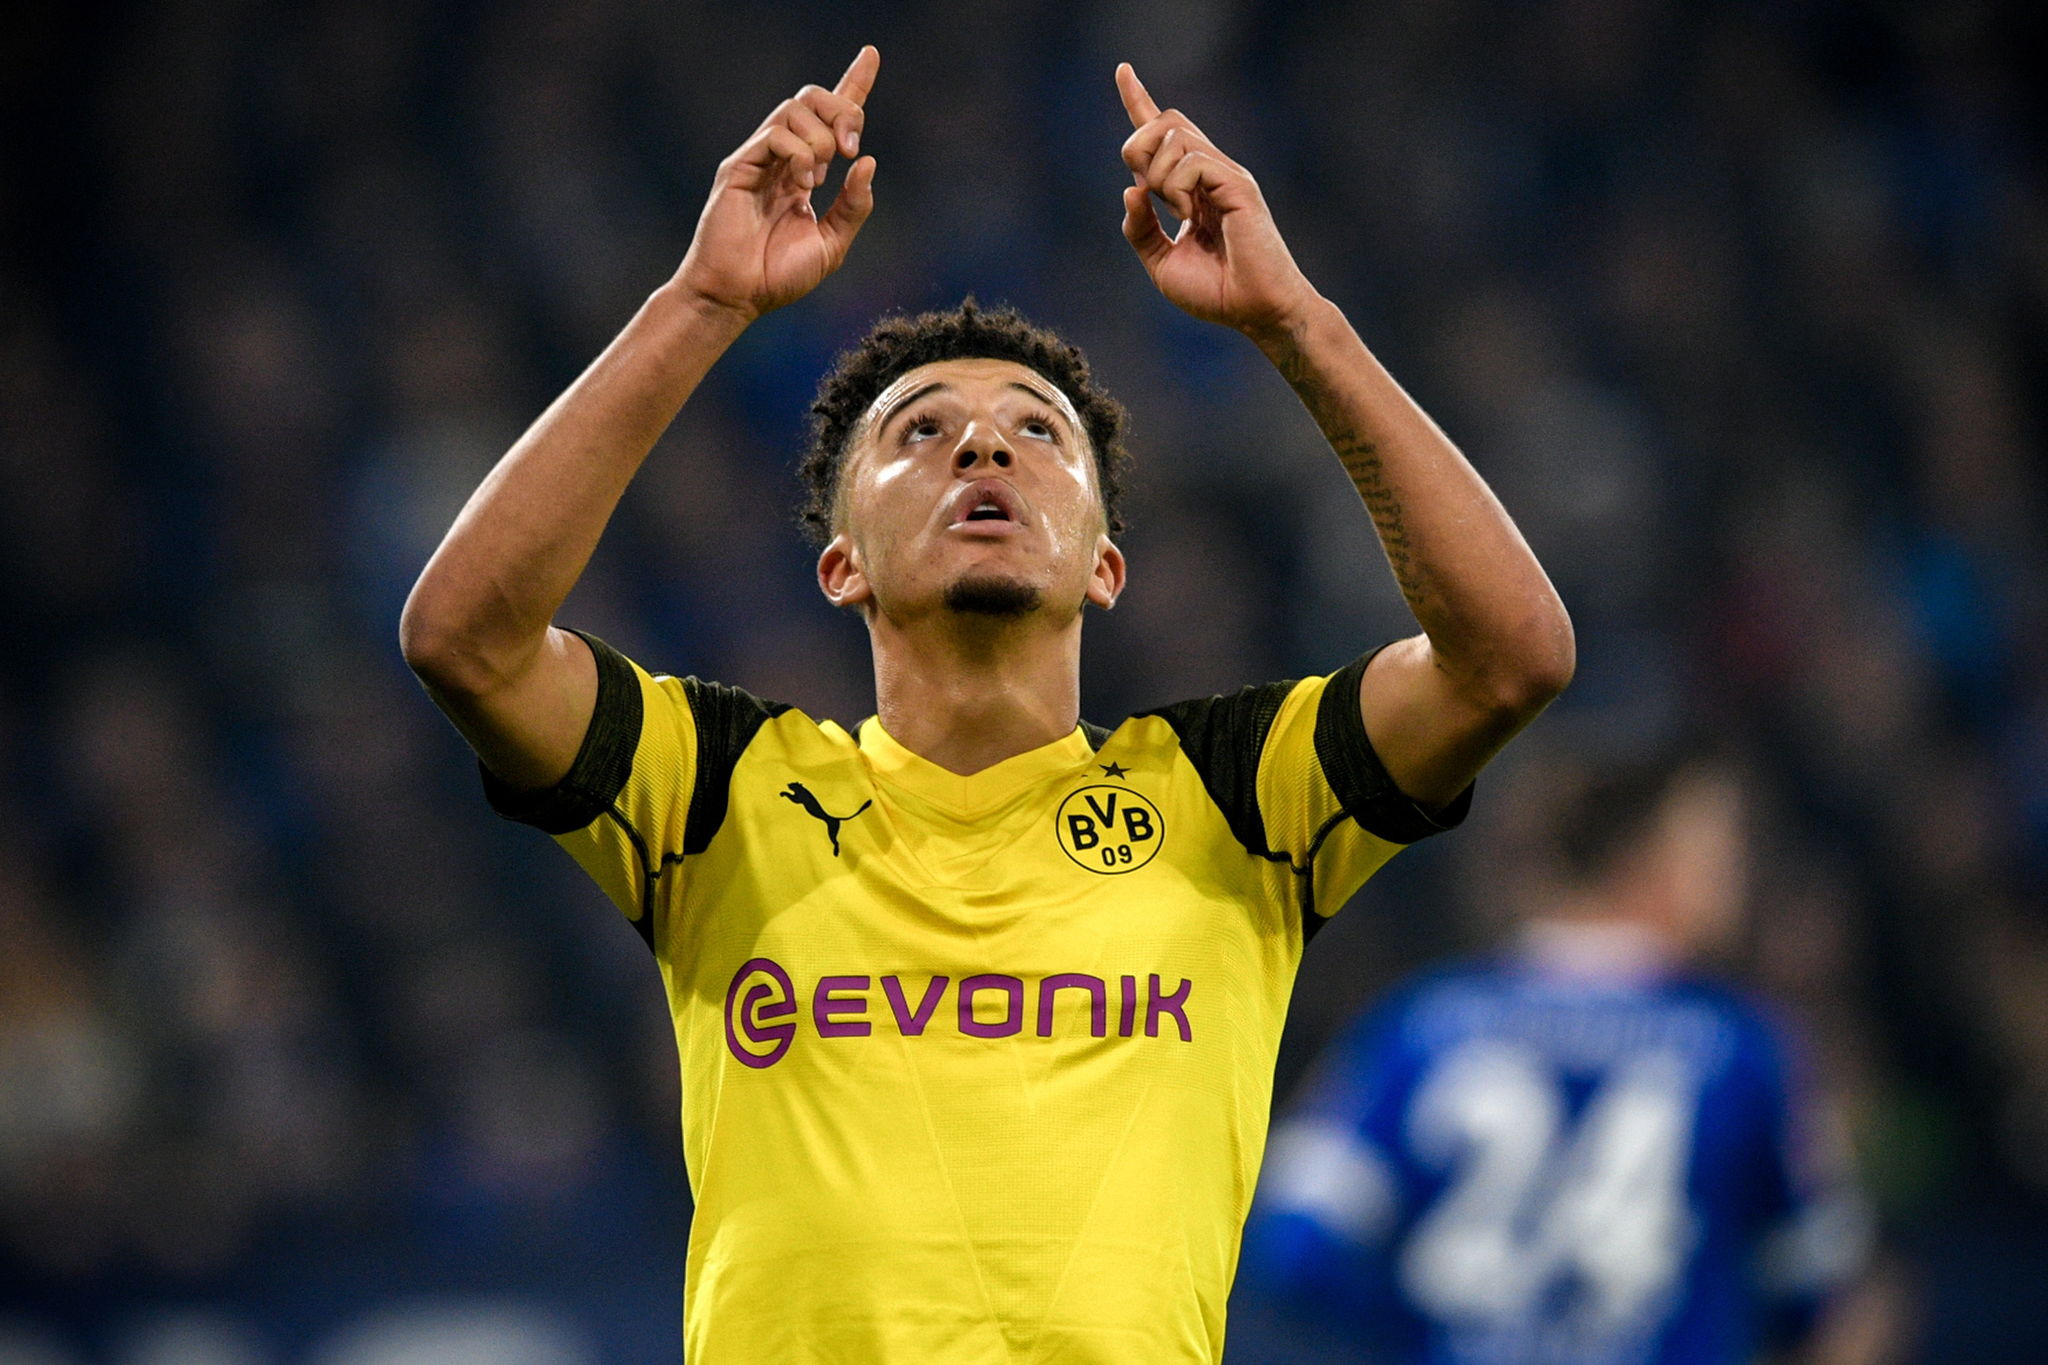 Gelsenkirchen (Germany), 08/12/2018.- Dortmunds Jadon Sancho celebrates after scoring the 2-1 lead during the German Bundesliga soccer match between FC Schalke 04 and Borussia Dortmund in Gelsenkirchen, Germany, 08 December 2018. (Alemania, Rusia) EFE/EPA/SASCHA STEINBACH CONDITIONS - ATTENTION: The DFL regulations prohibit any use of photographs as image sequences and/or quasi-video.